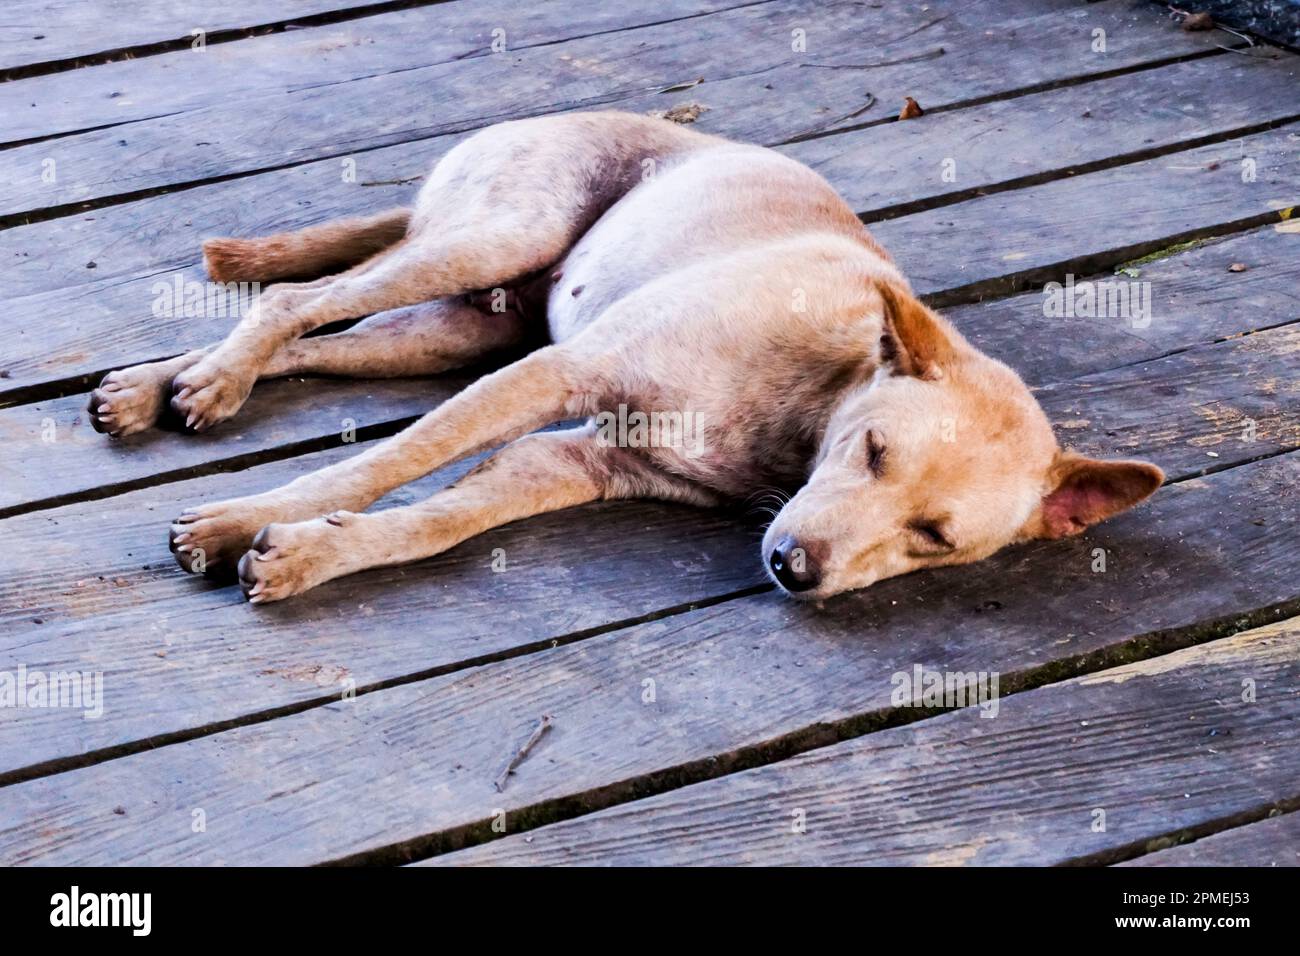 Rest and Relax: Capturing the Serenity of a Sleeping Dog Stock Photo